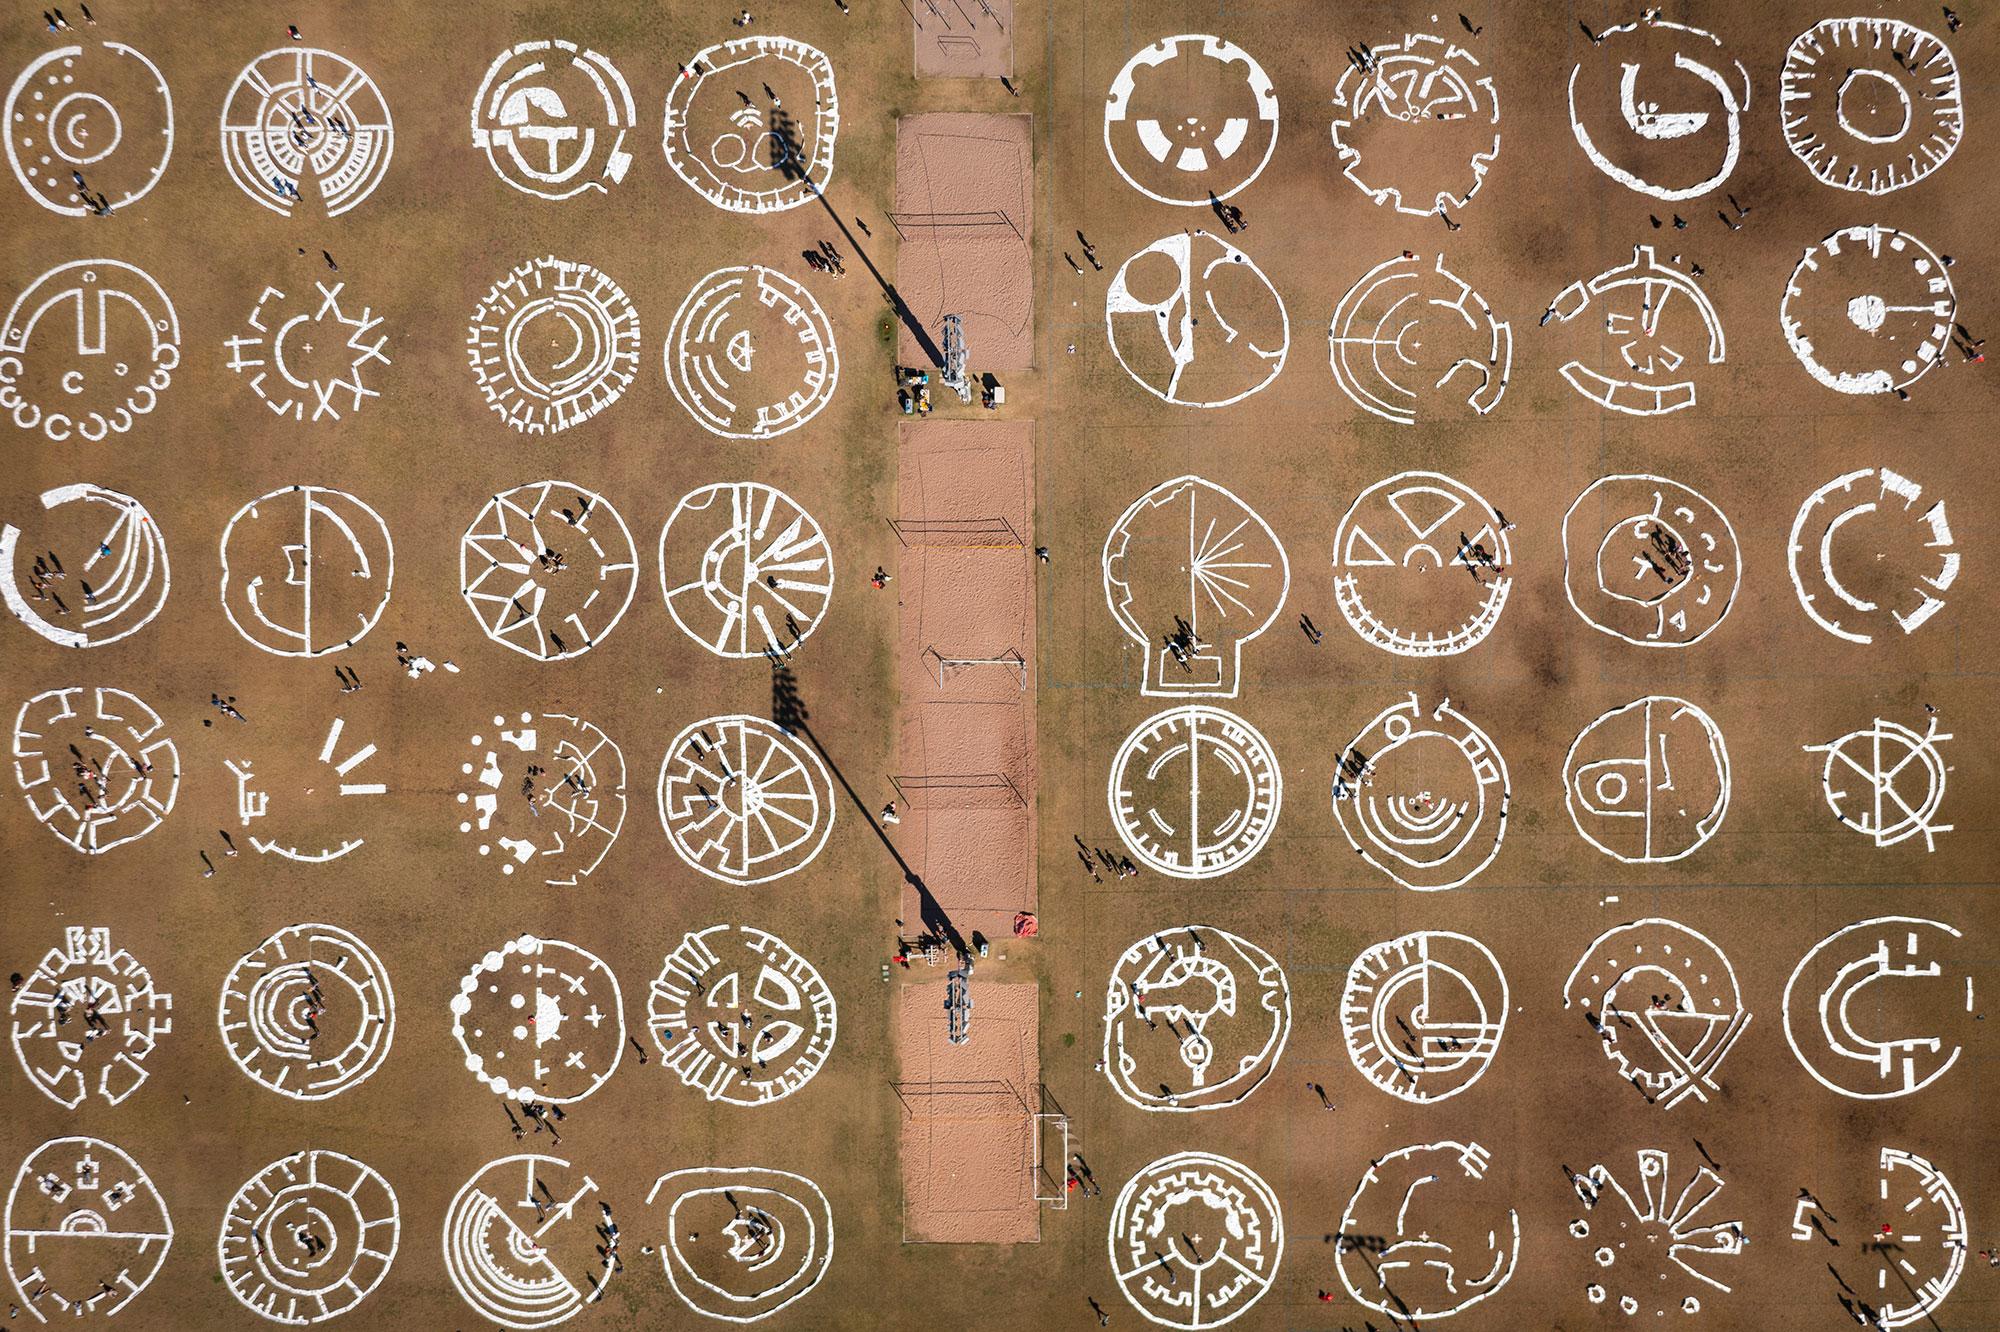 Aerial view of circular images produced by architecture students on a field.